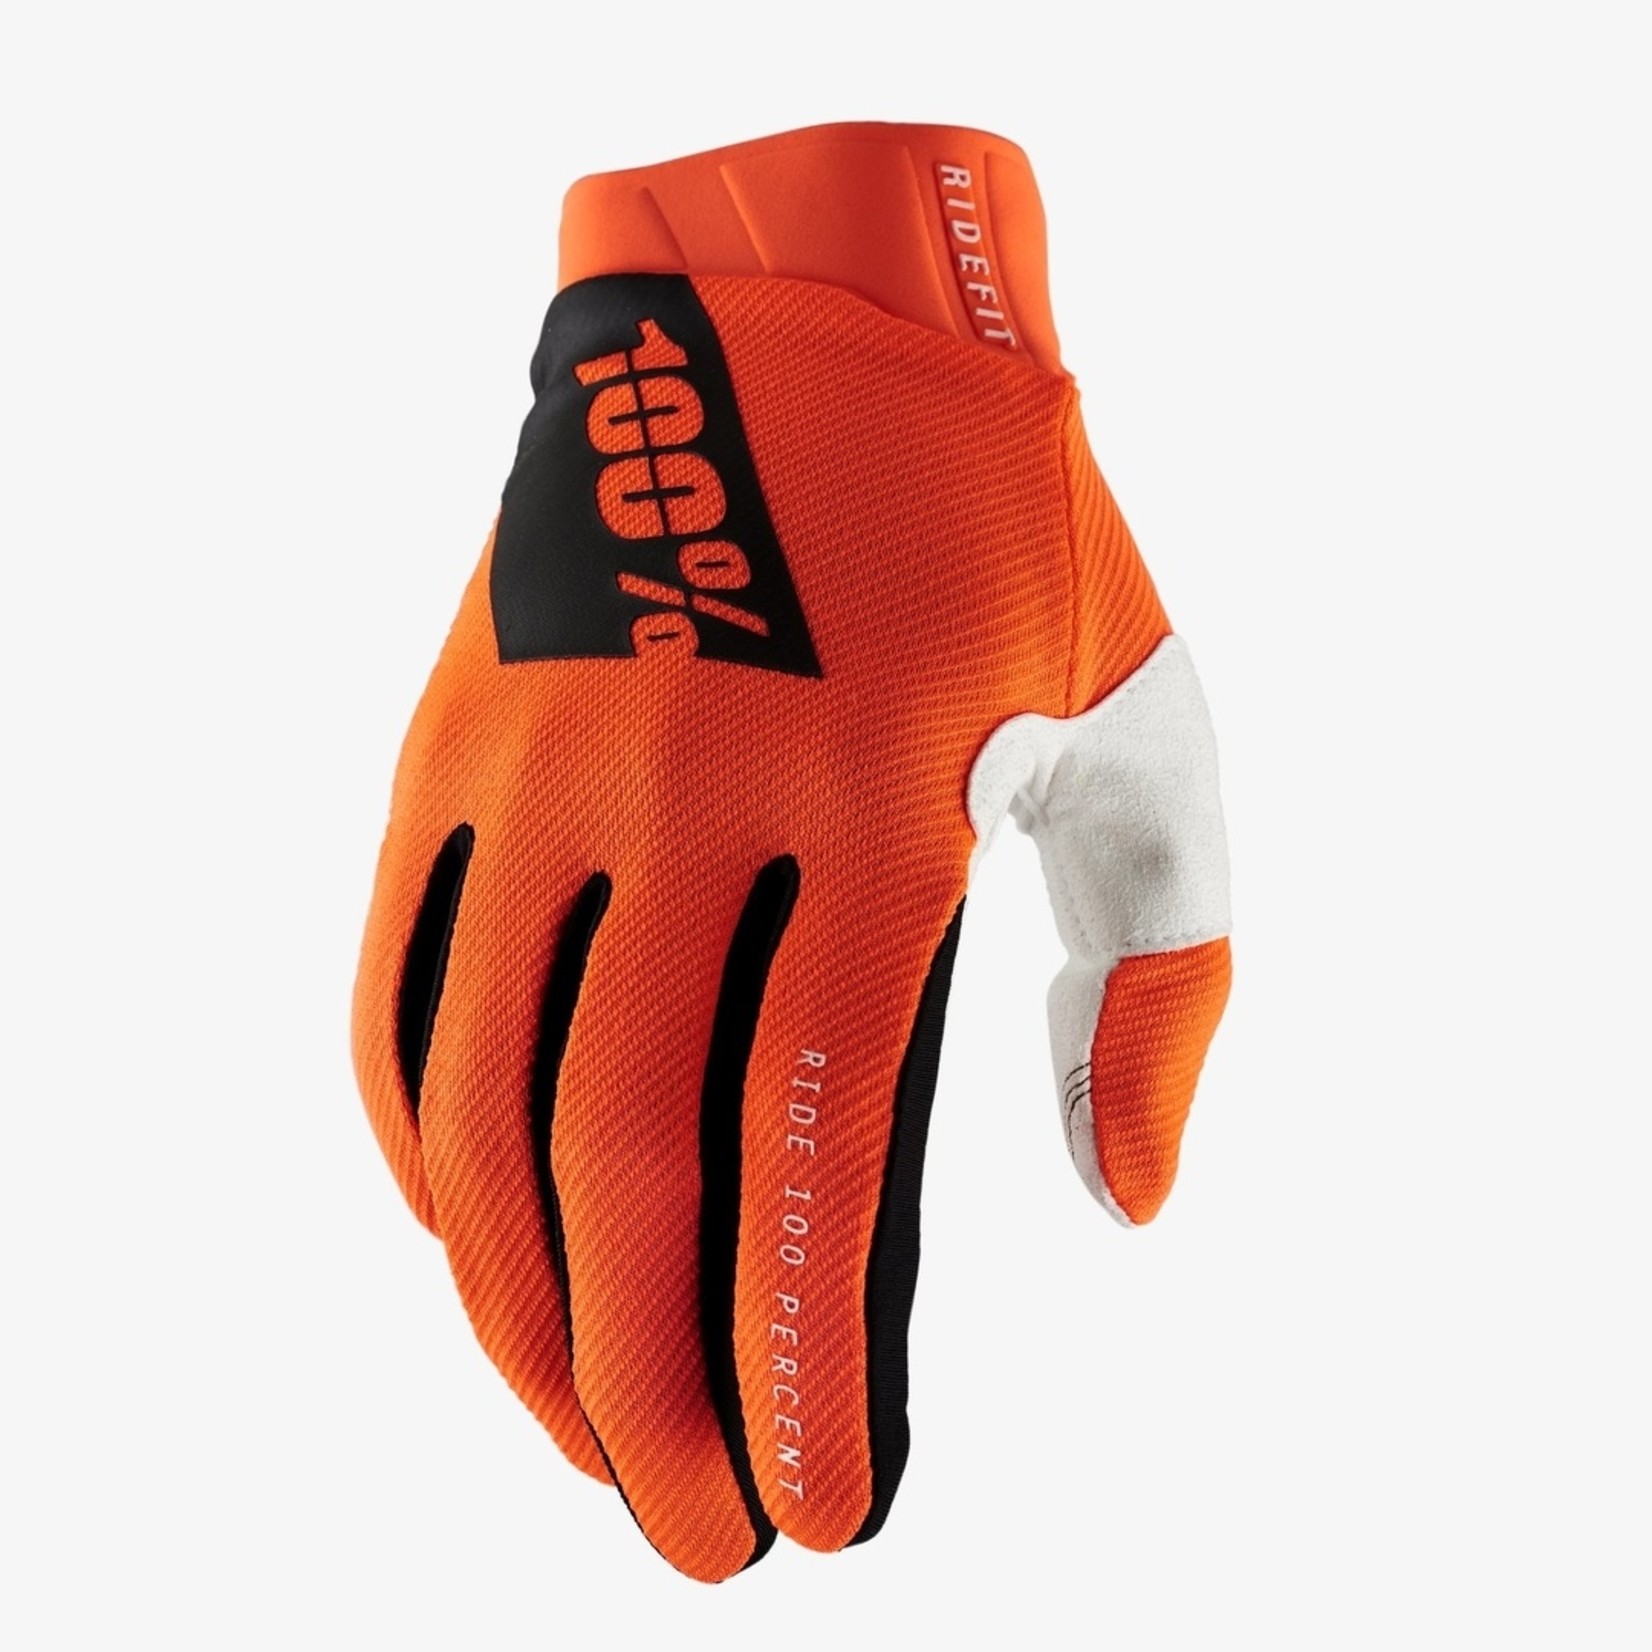 FE sports 100% Ridefit Cycling Gloves - Fluo Orange